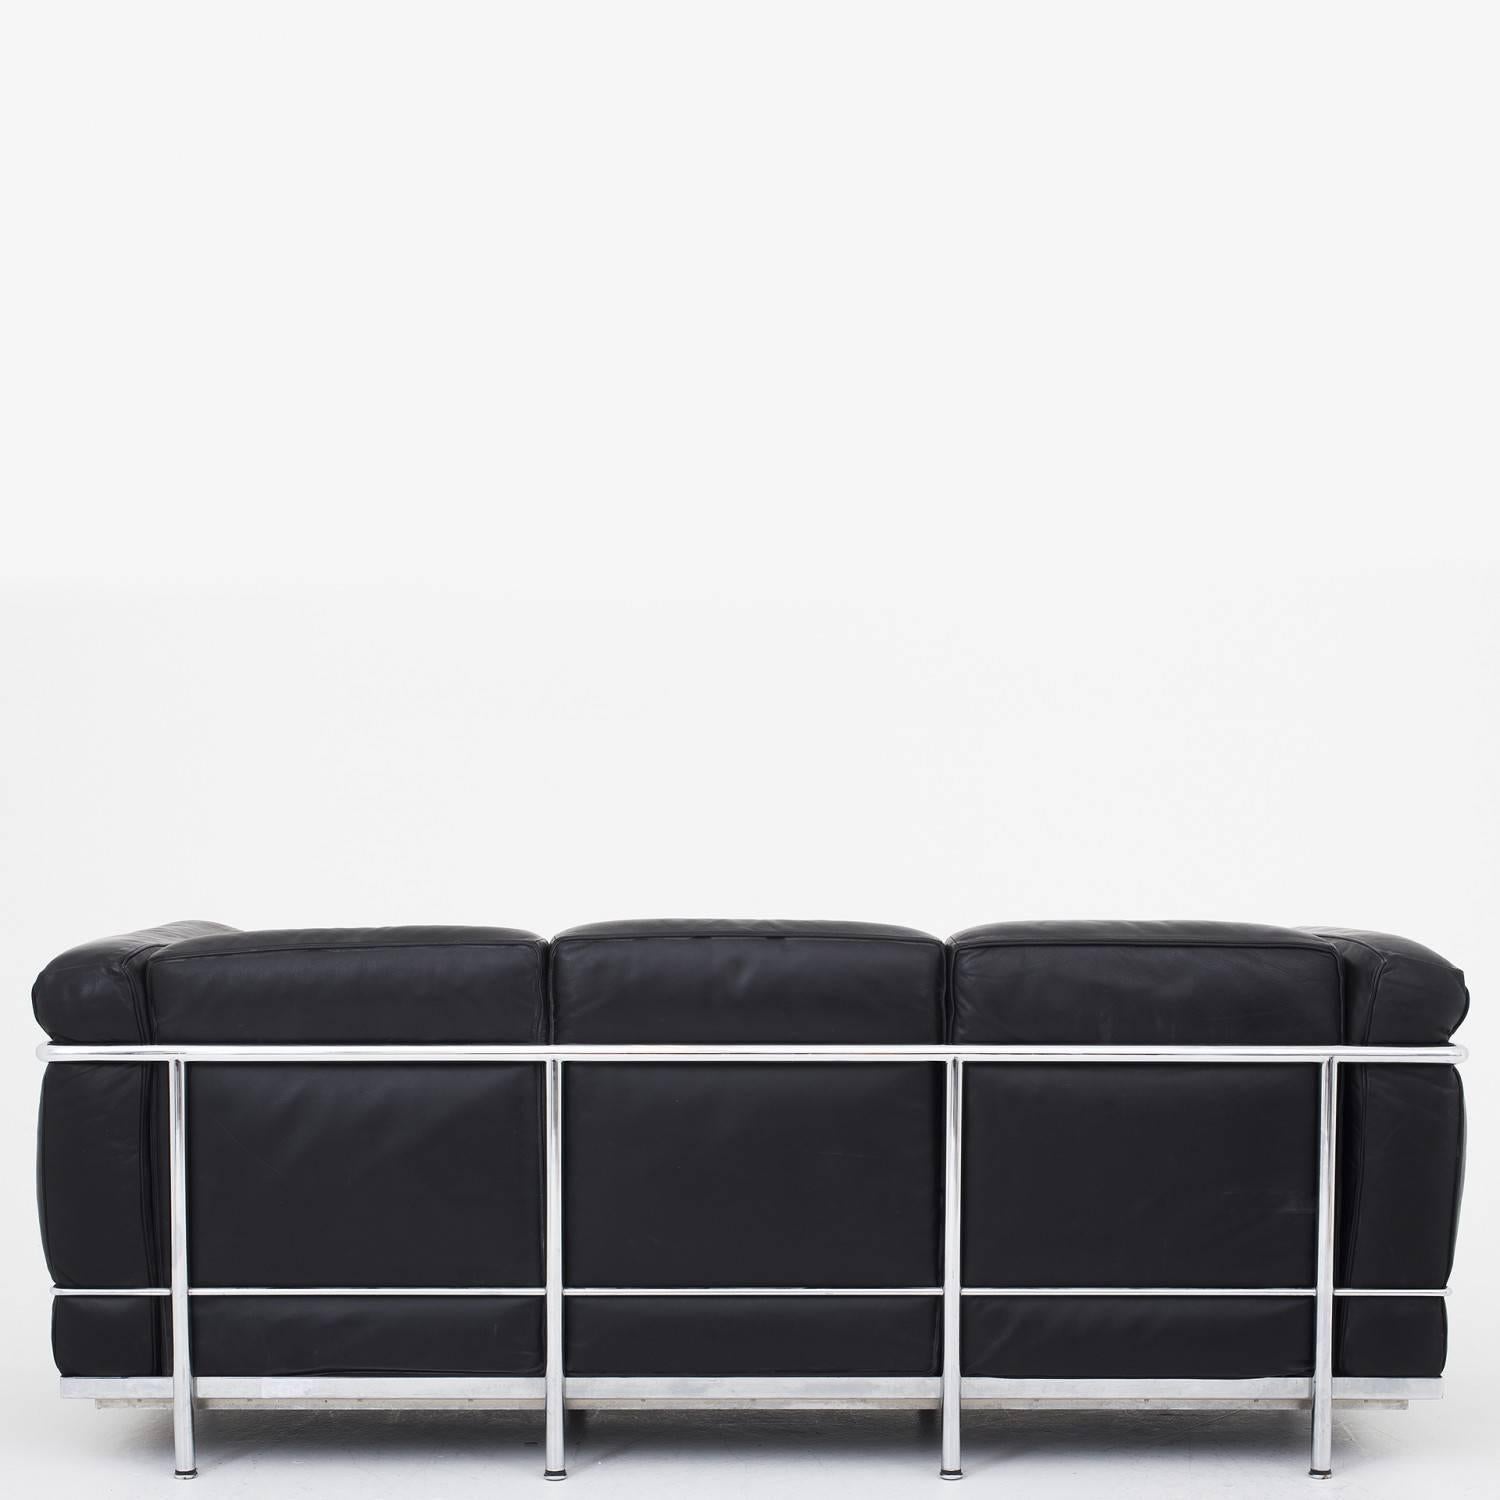 Le Corbusier three-seat sofa in original black leather and frame in steel. Designed by Le Corbusier. Maker Cassina.